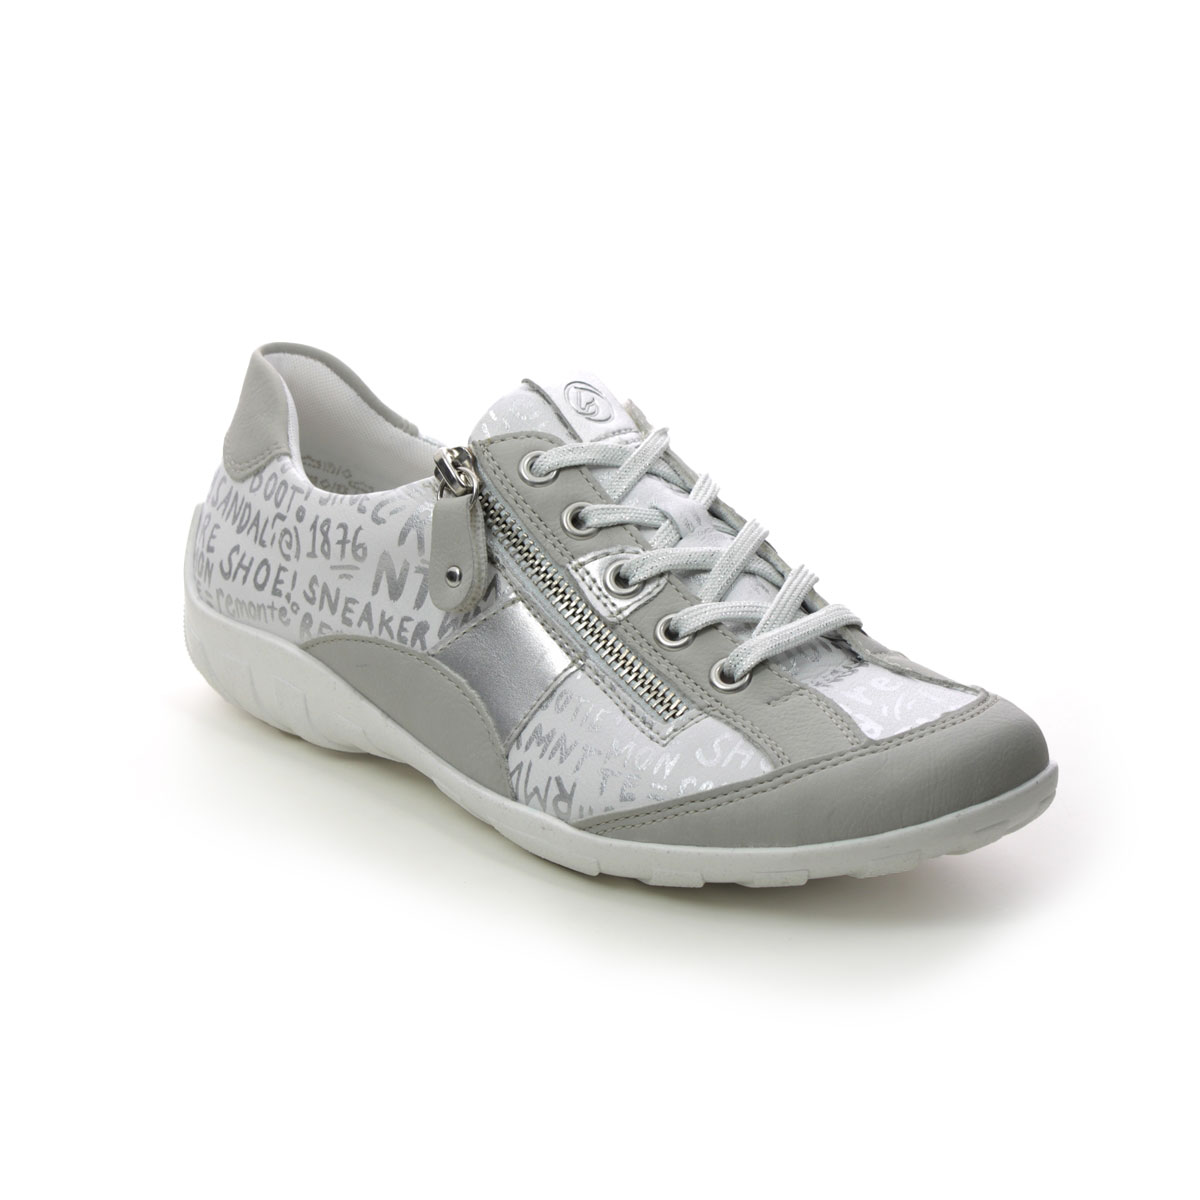 Remonte Livtext 21 Light Grey Leather Womens Lacing Shoes R3403-80 In Size 38 In Plain Light Grey Leather